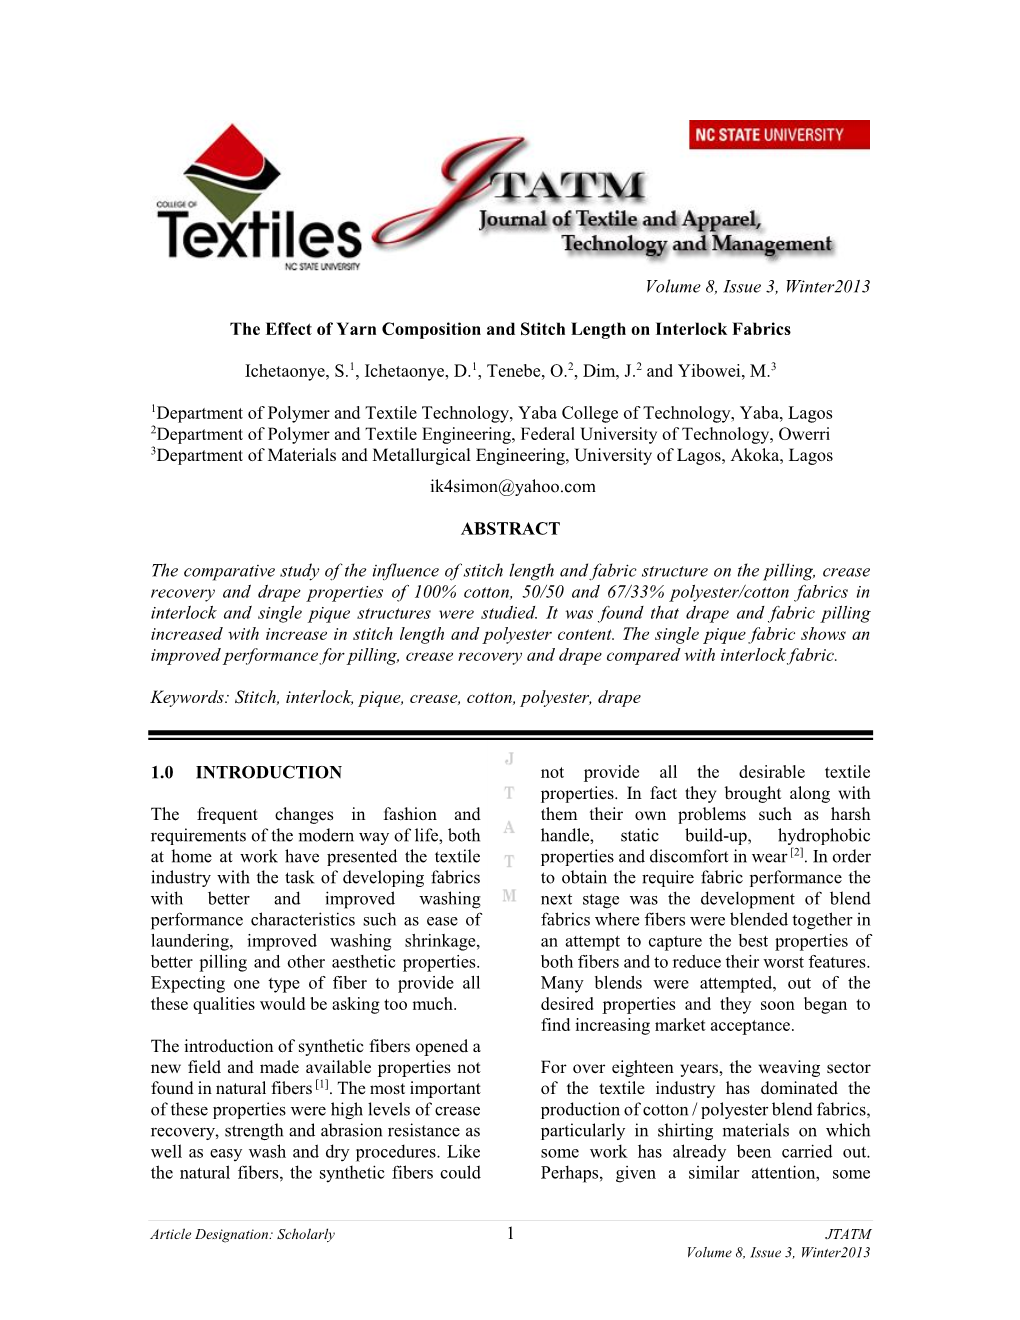 The Effect of Yarn Composition and Stitch Length on Interlock Fabrics